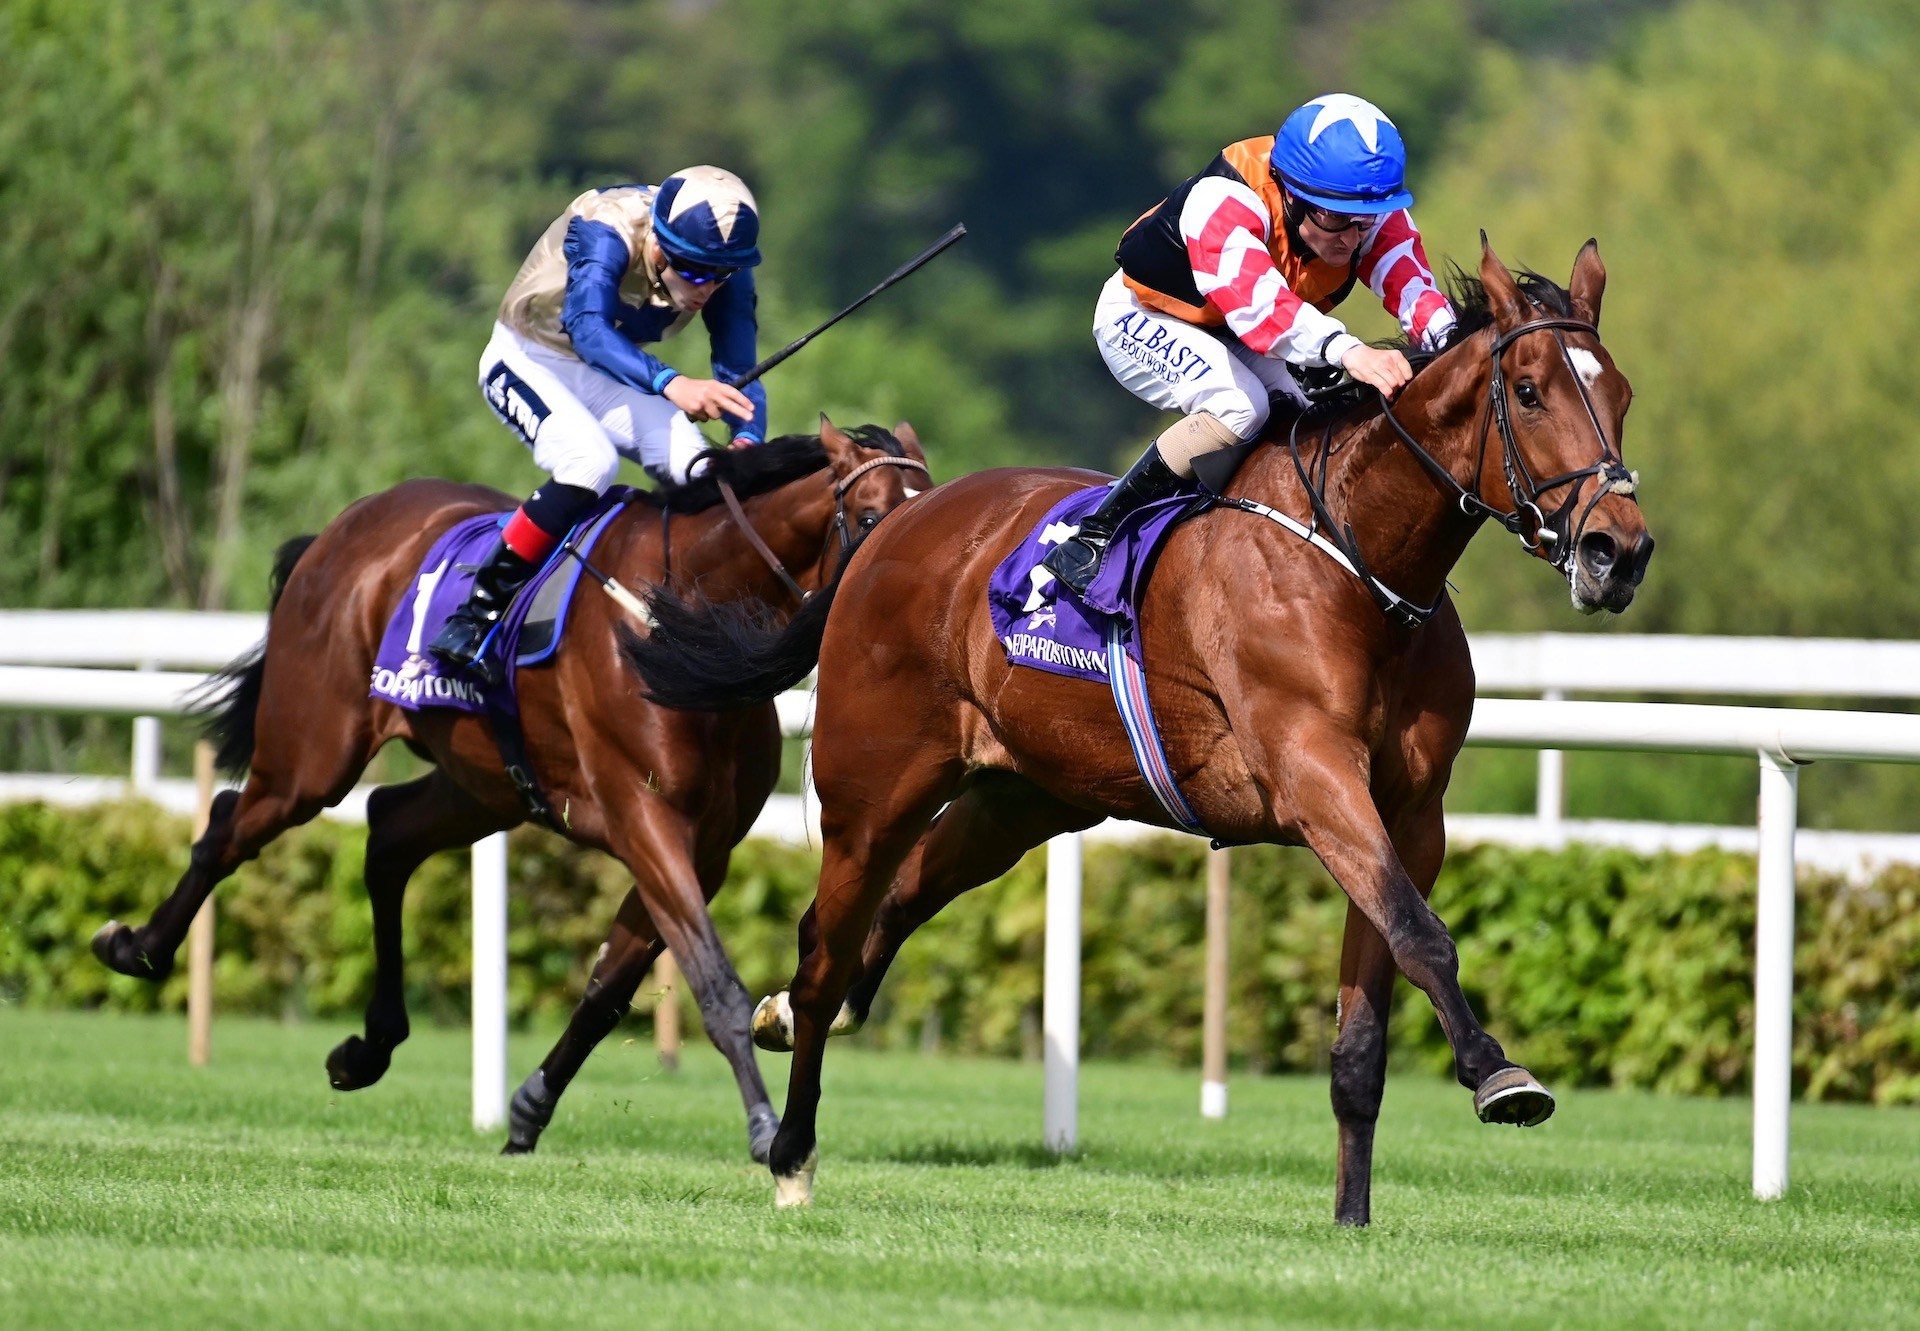 Yashin (Churchill) Wins The Group 3 Saval Beg Levmoss Stakes At Leopardstown